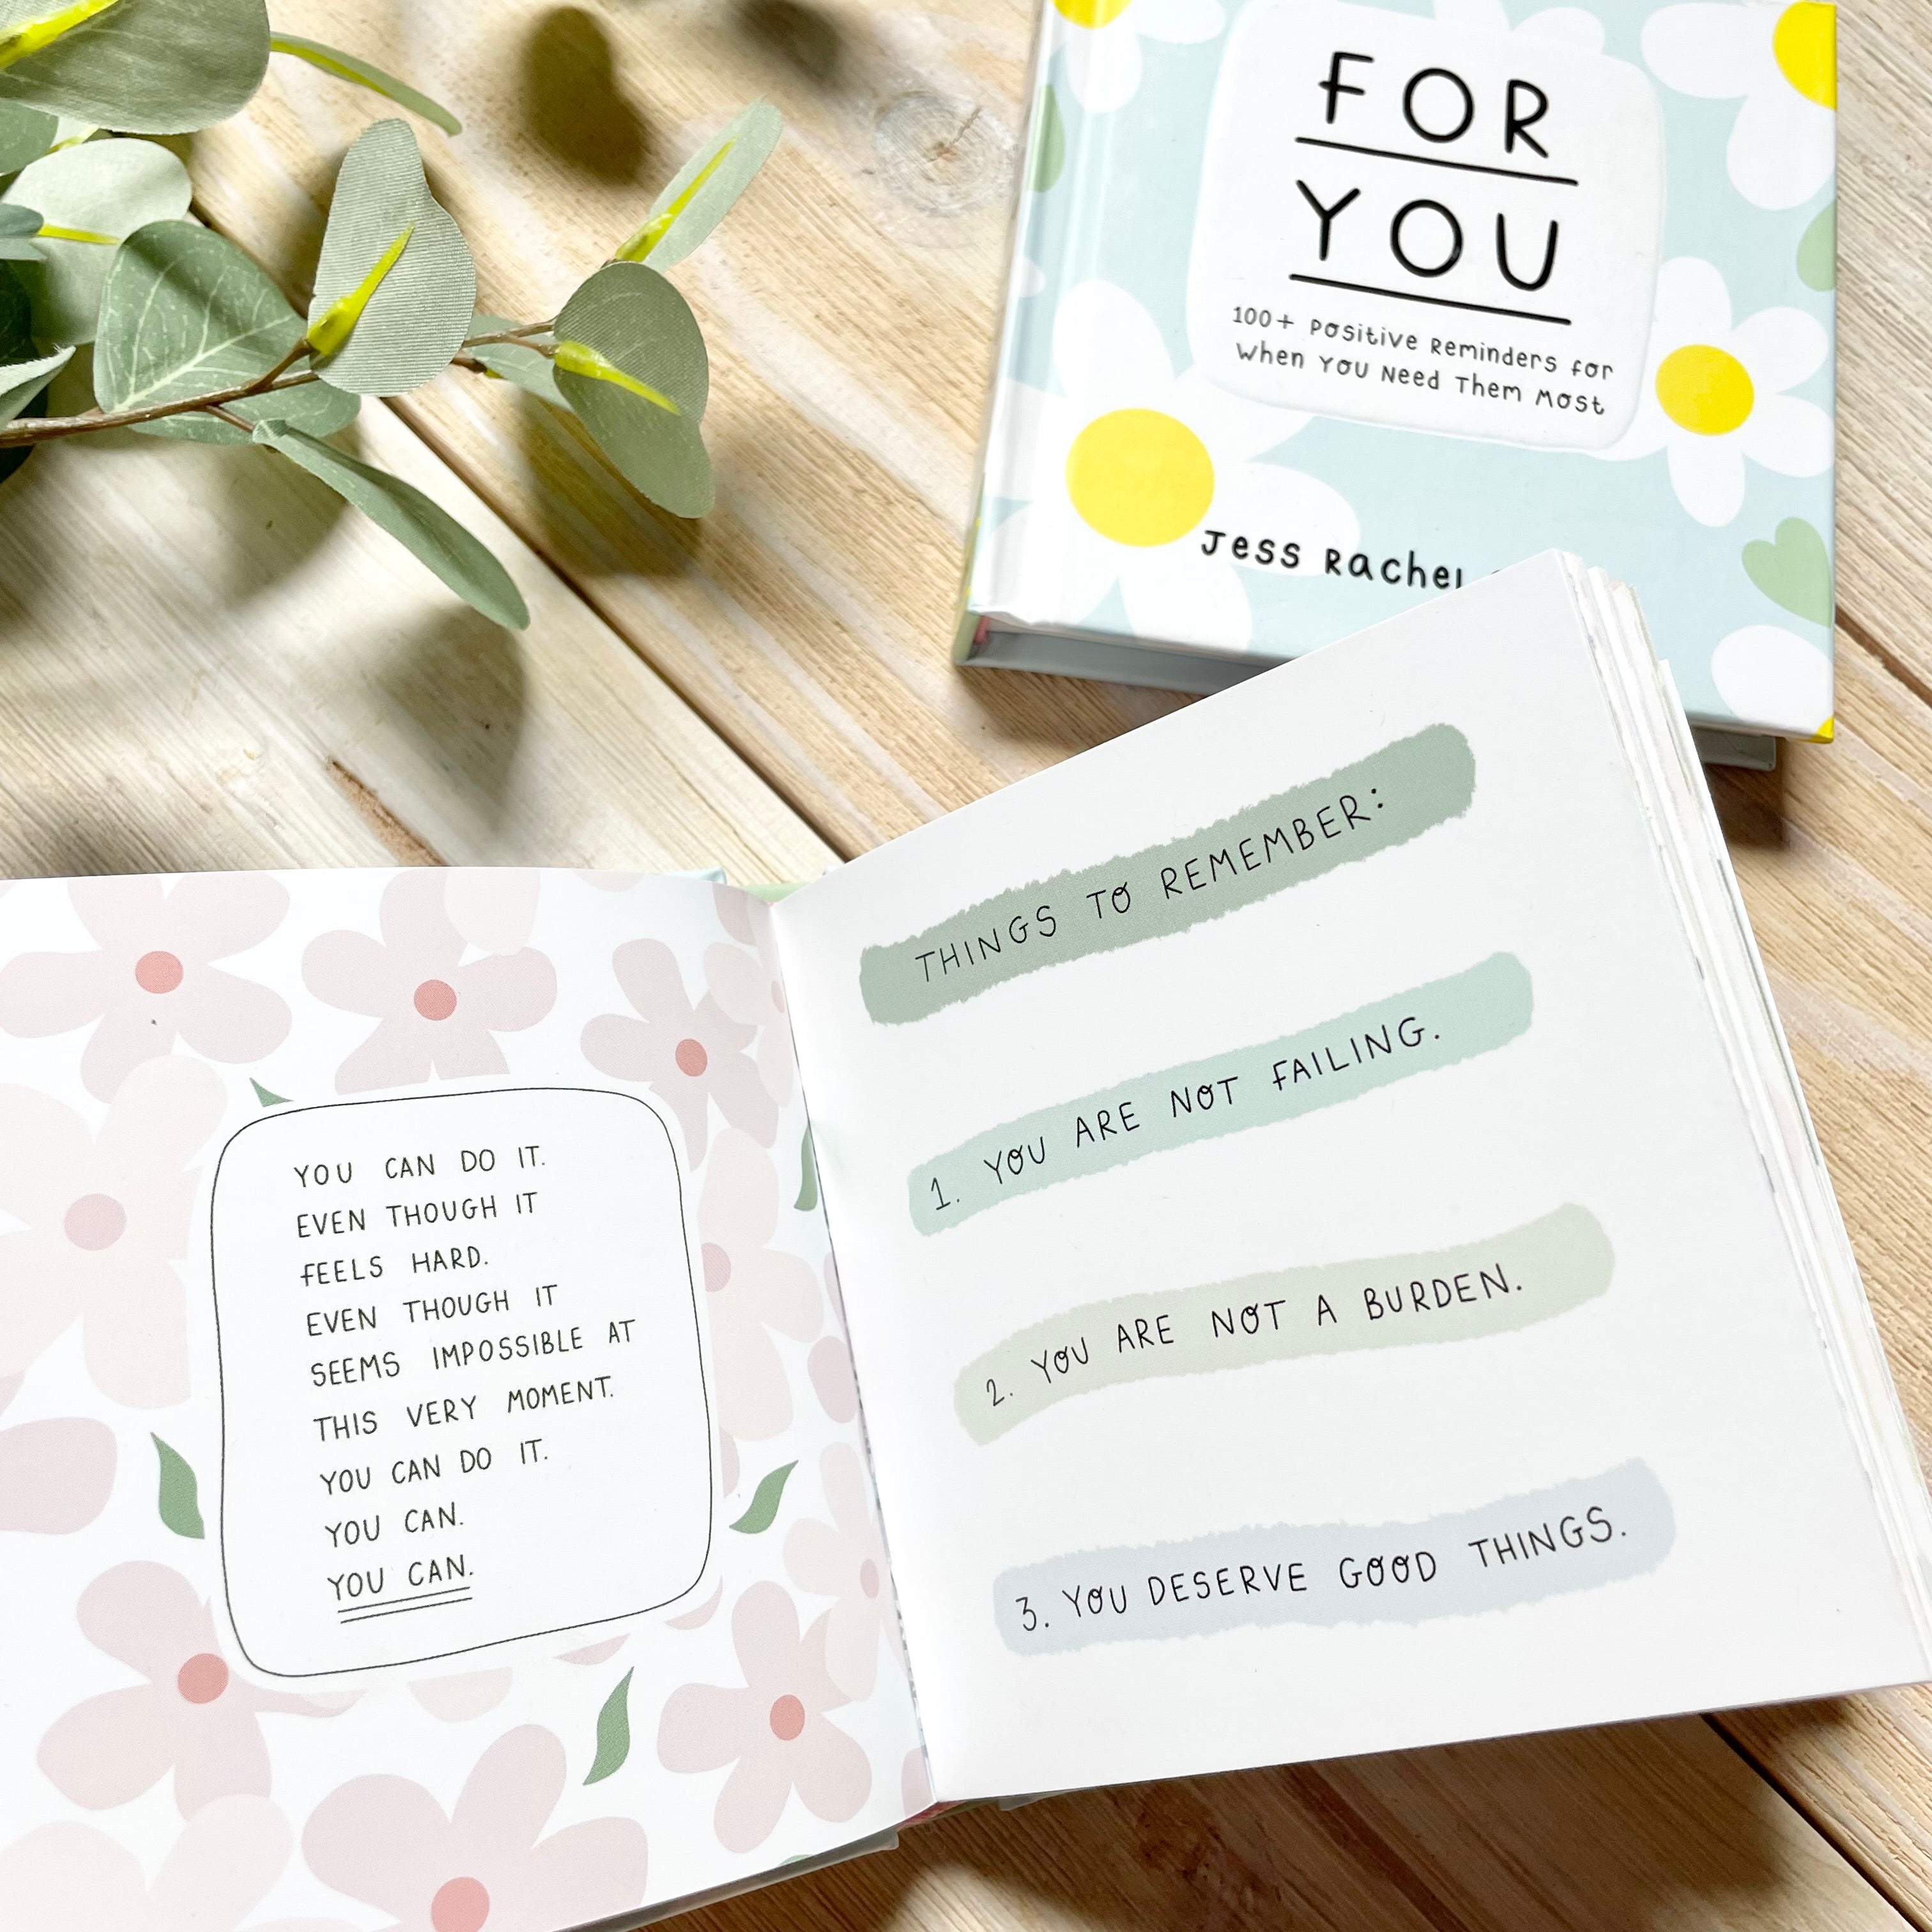 For You: 100 Positive Reminders for When You Need Them Most Mini Book